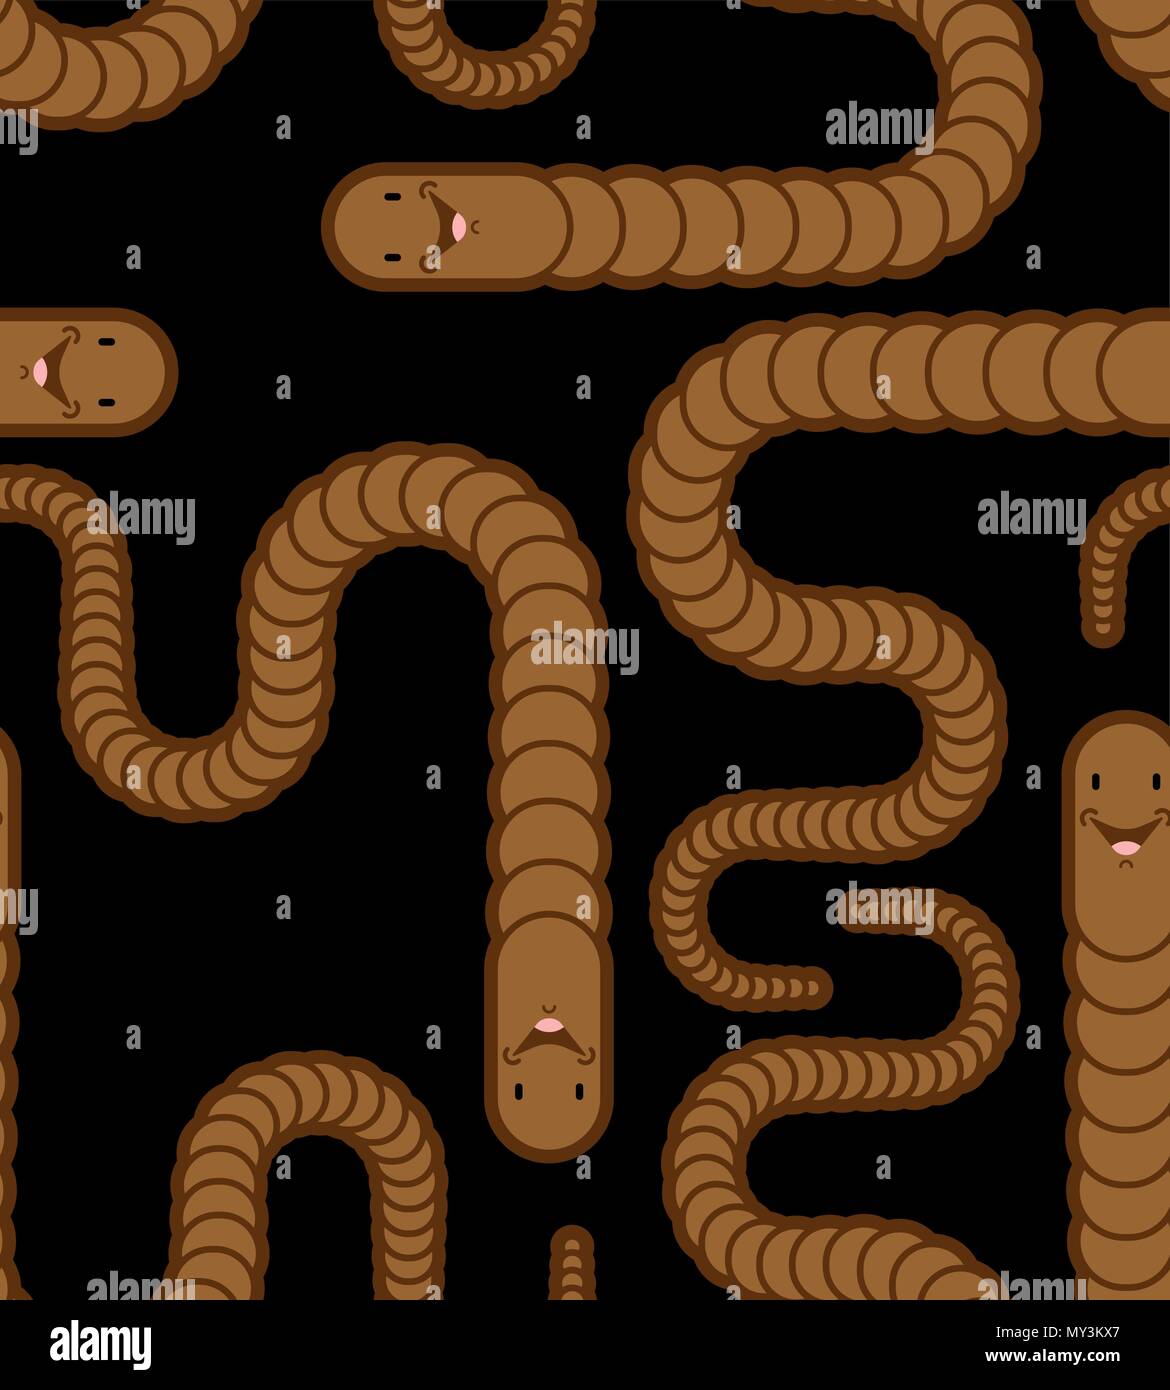 Earthworm pattern seamless. Earth Worm background. Vector illustration Stock Vector